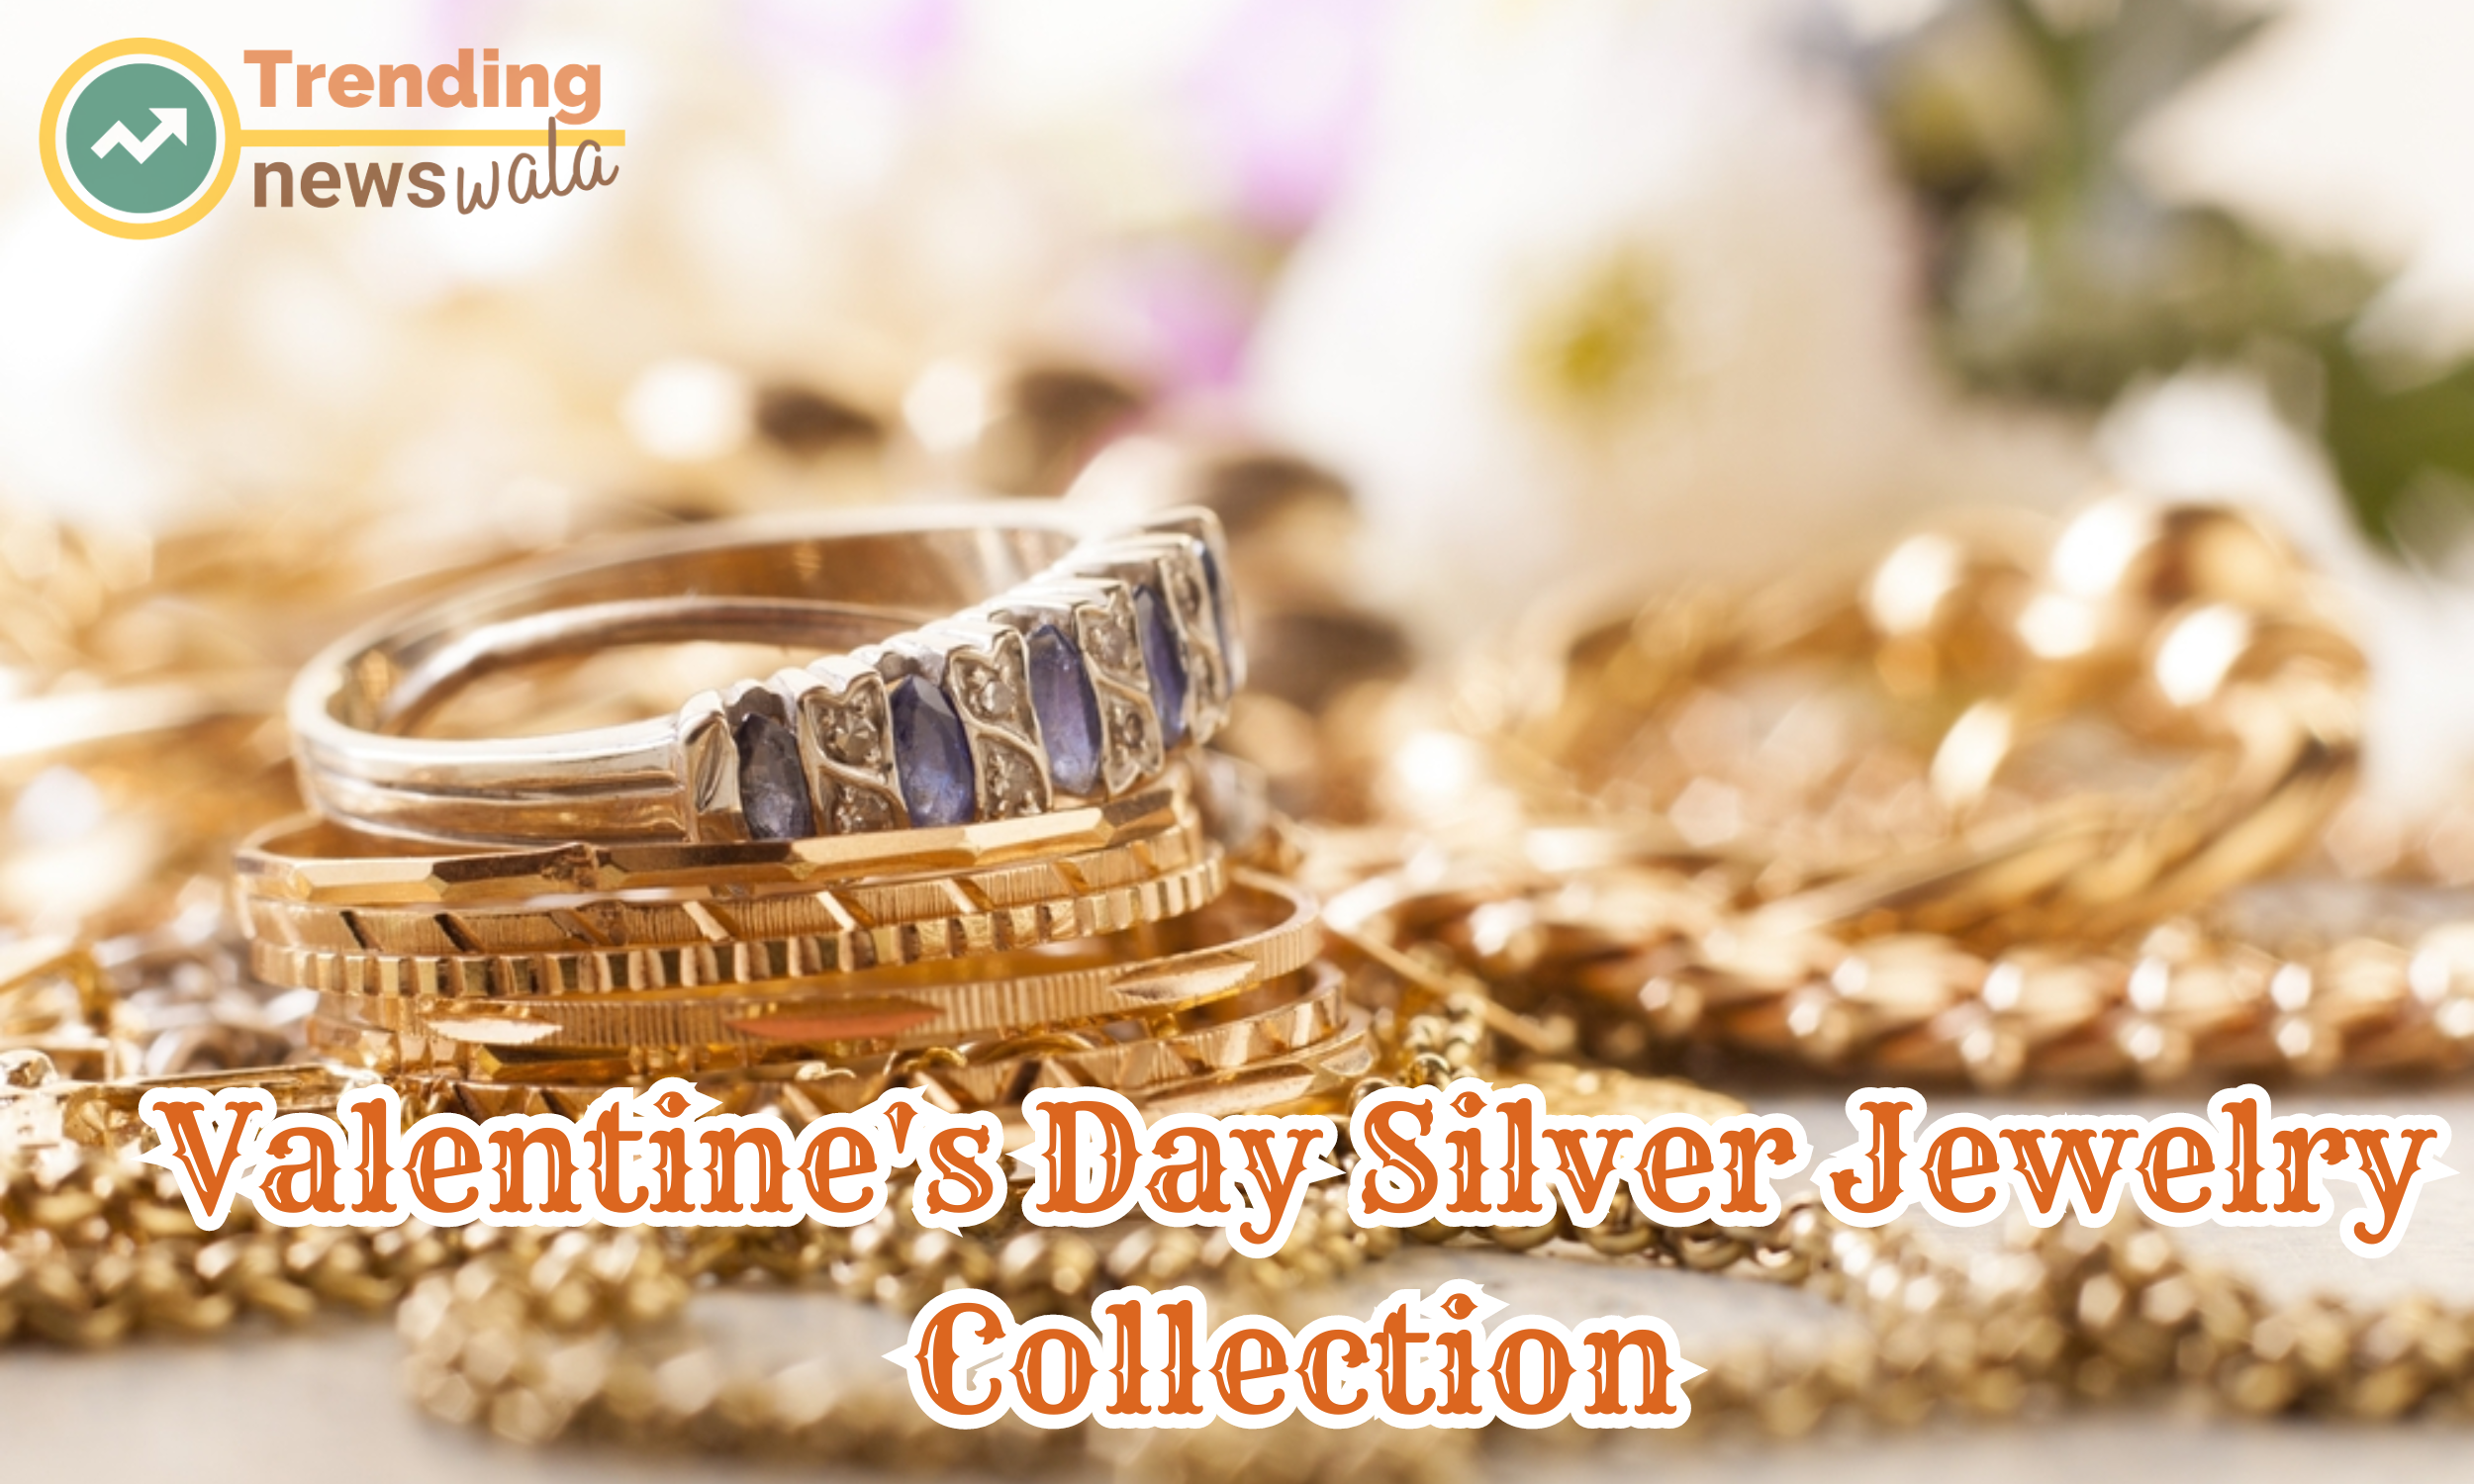 A Valentine's Day silver jewelry collection is curated with the romantic